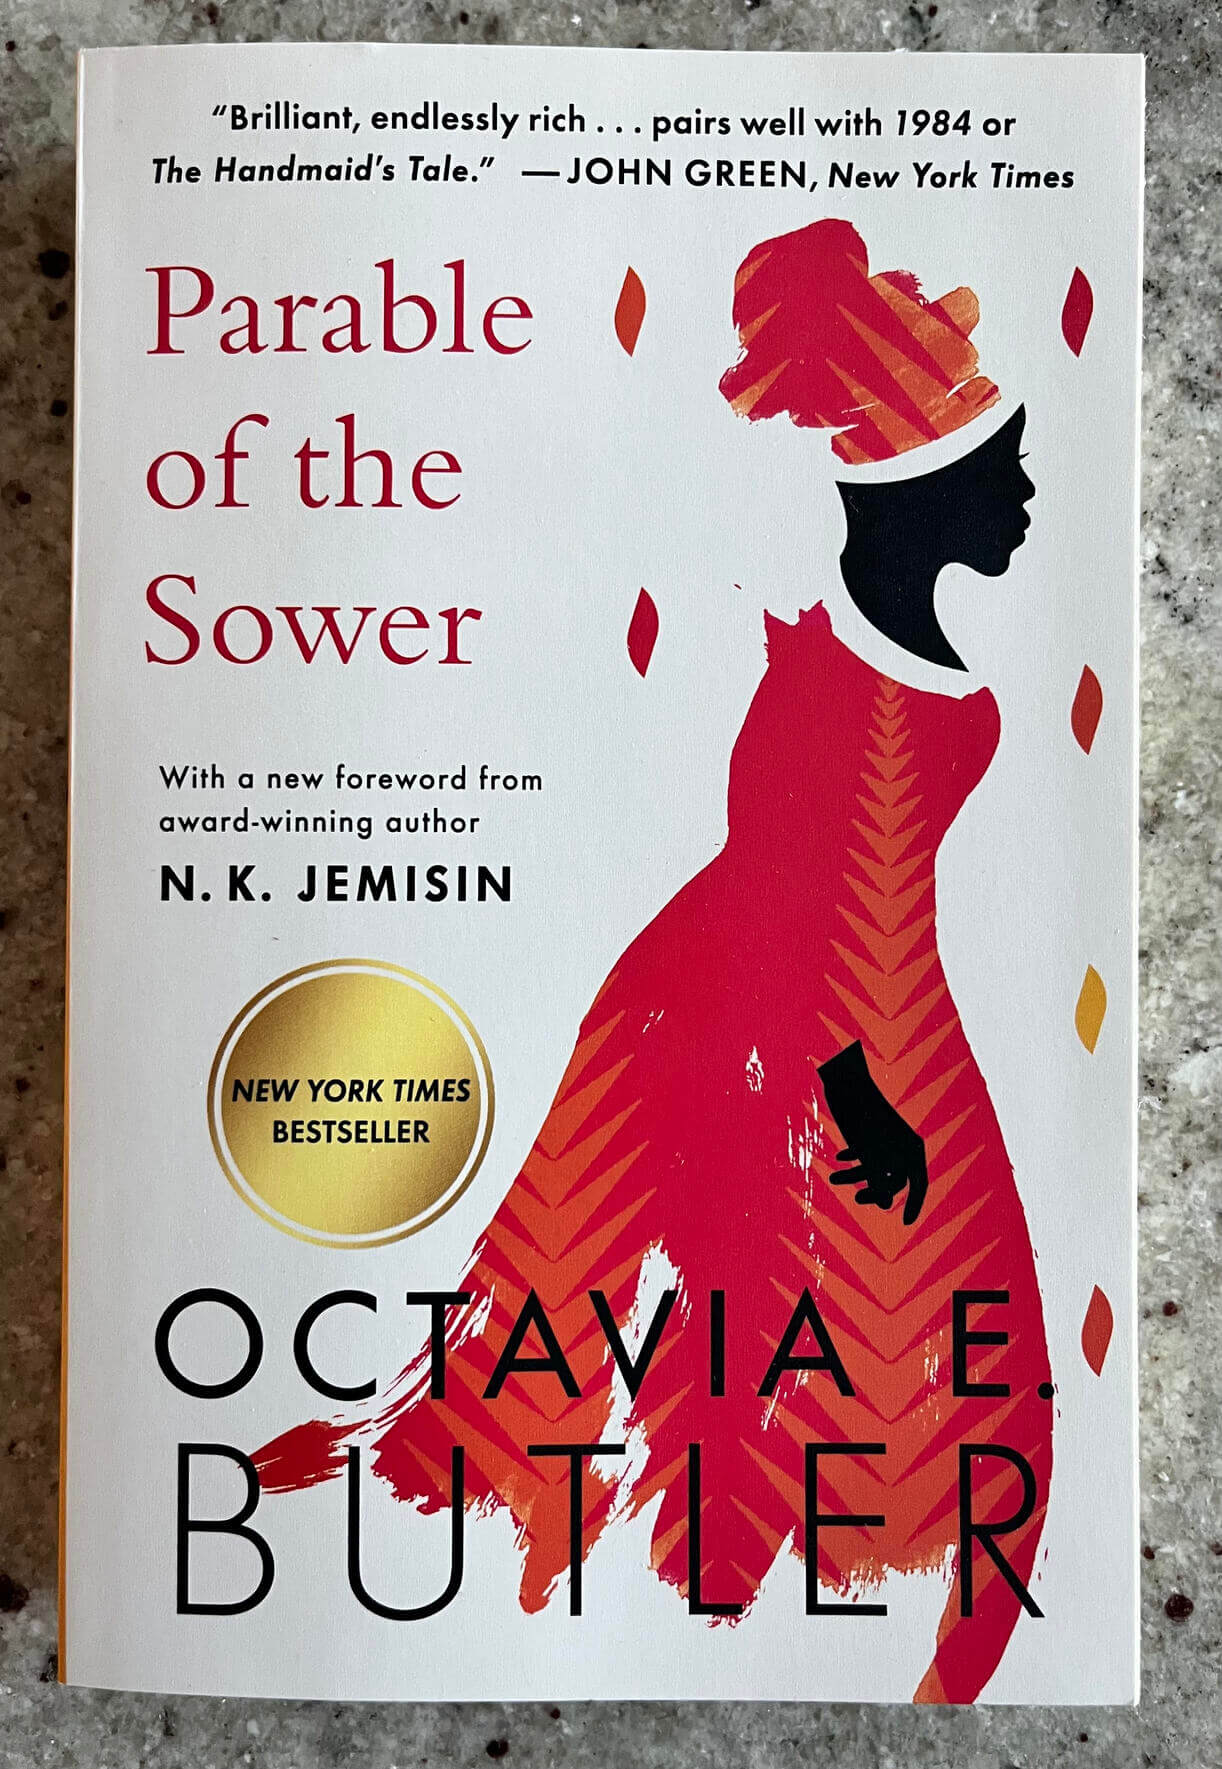 “Parable of the Sower” by Octavia E. Butler. Foreword from award-winning author N.K. Jemisin